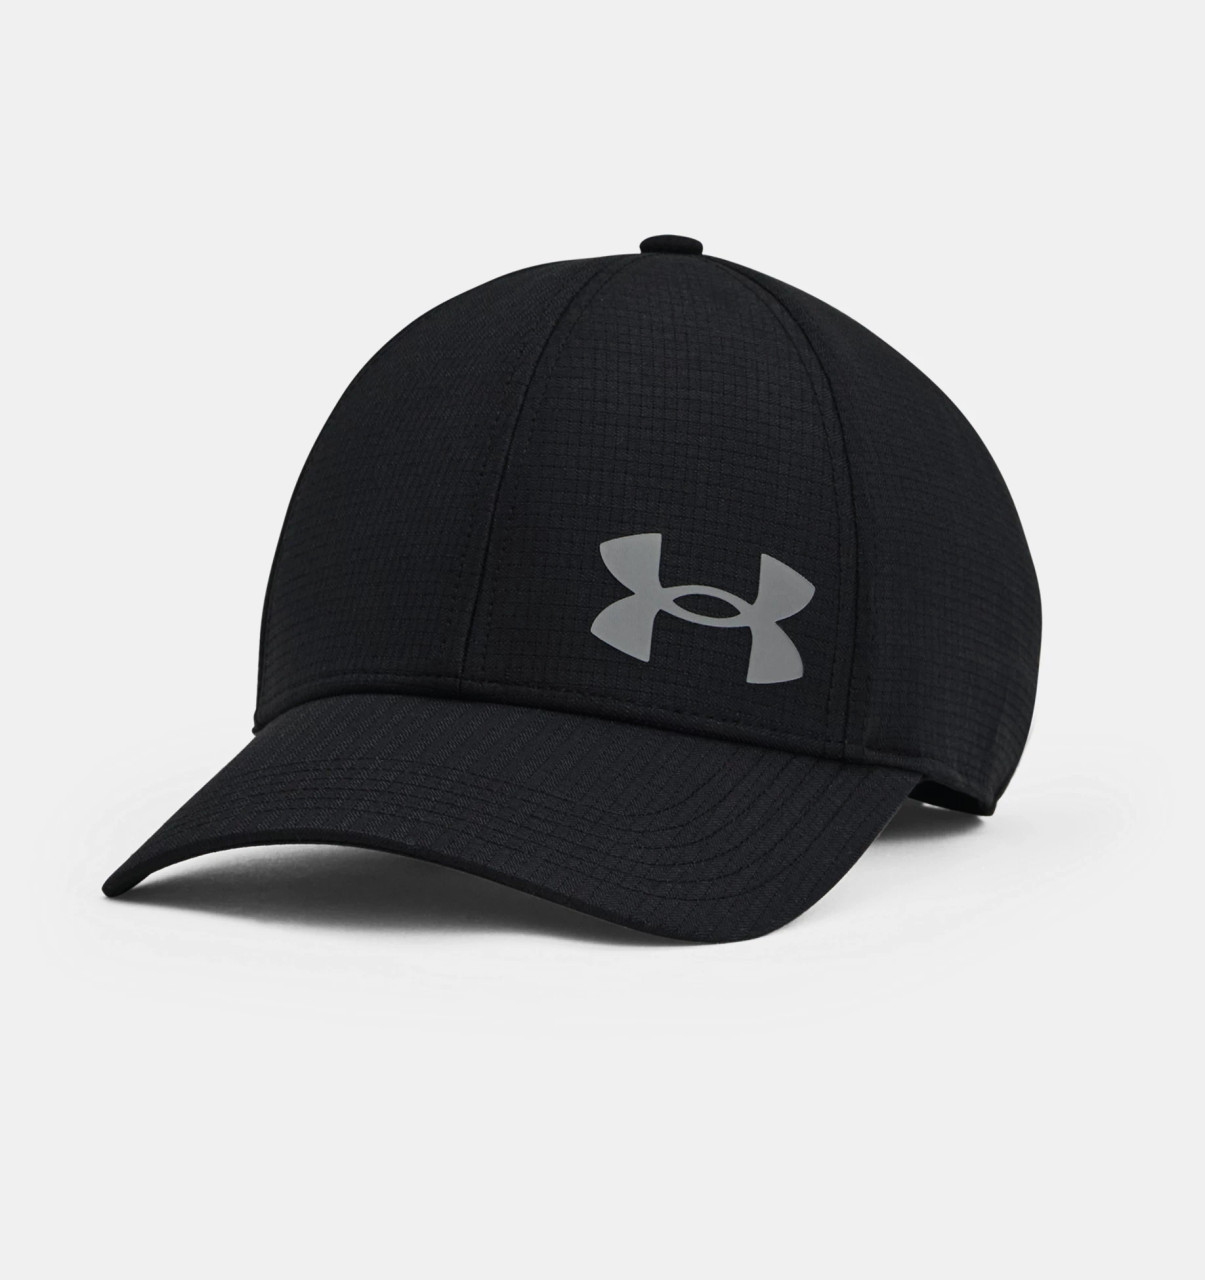 Under Armour Men's Iso-Chill ArmourVent™ Stretch Cap Hats -